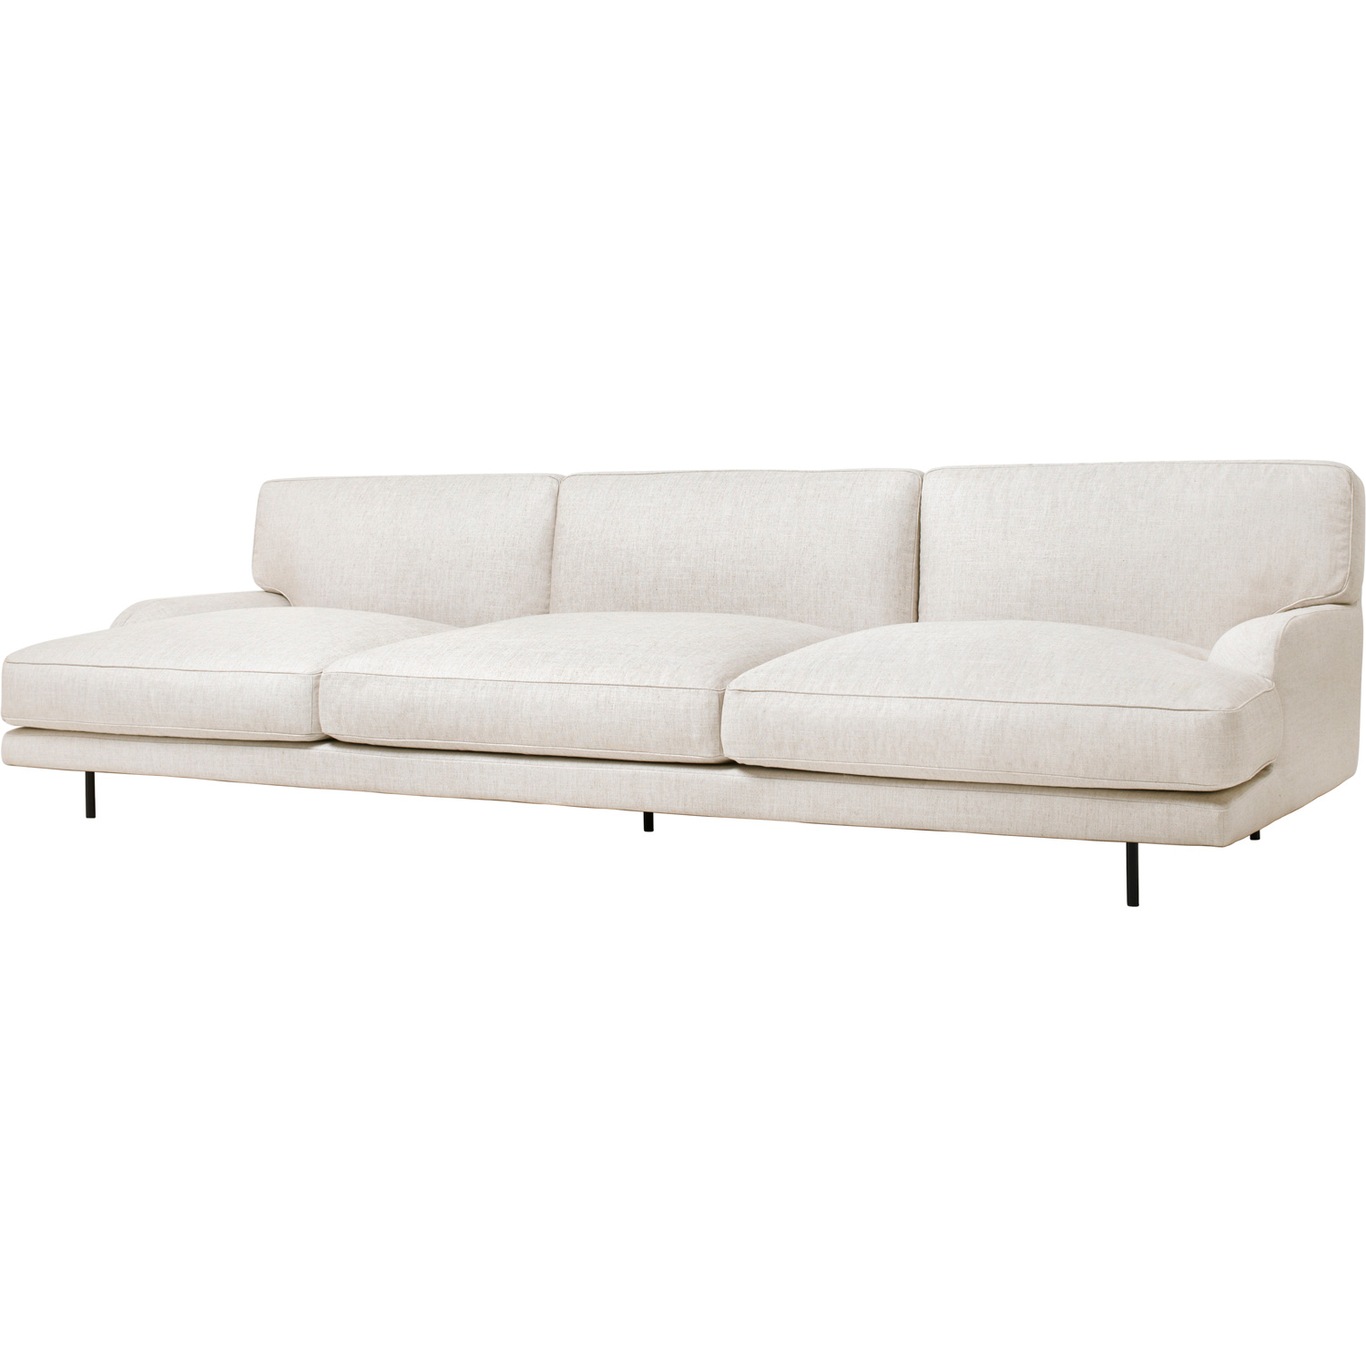 Flaneur Sofa FC 3-Pers, Ben Sort / Hot Madison 419 Off White